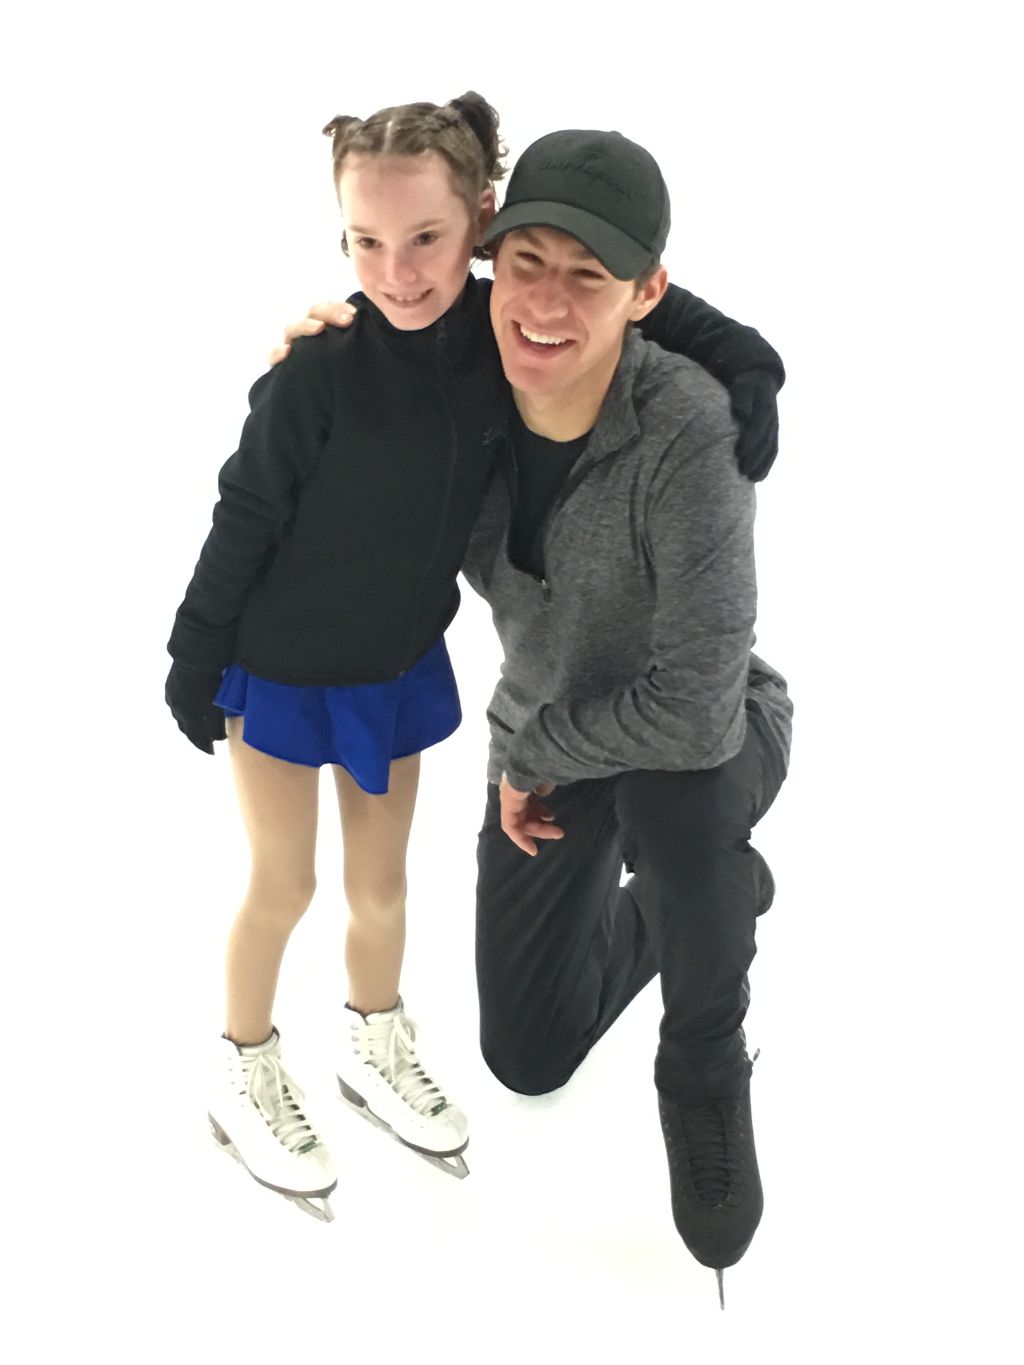 Set Goals with Jason Brown + Private Skating Lesson!